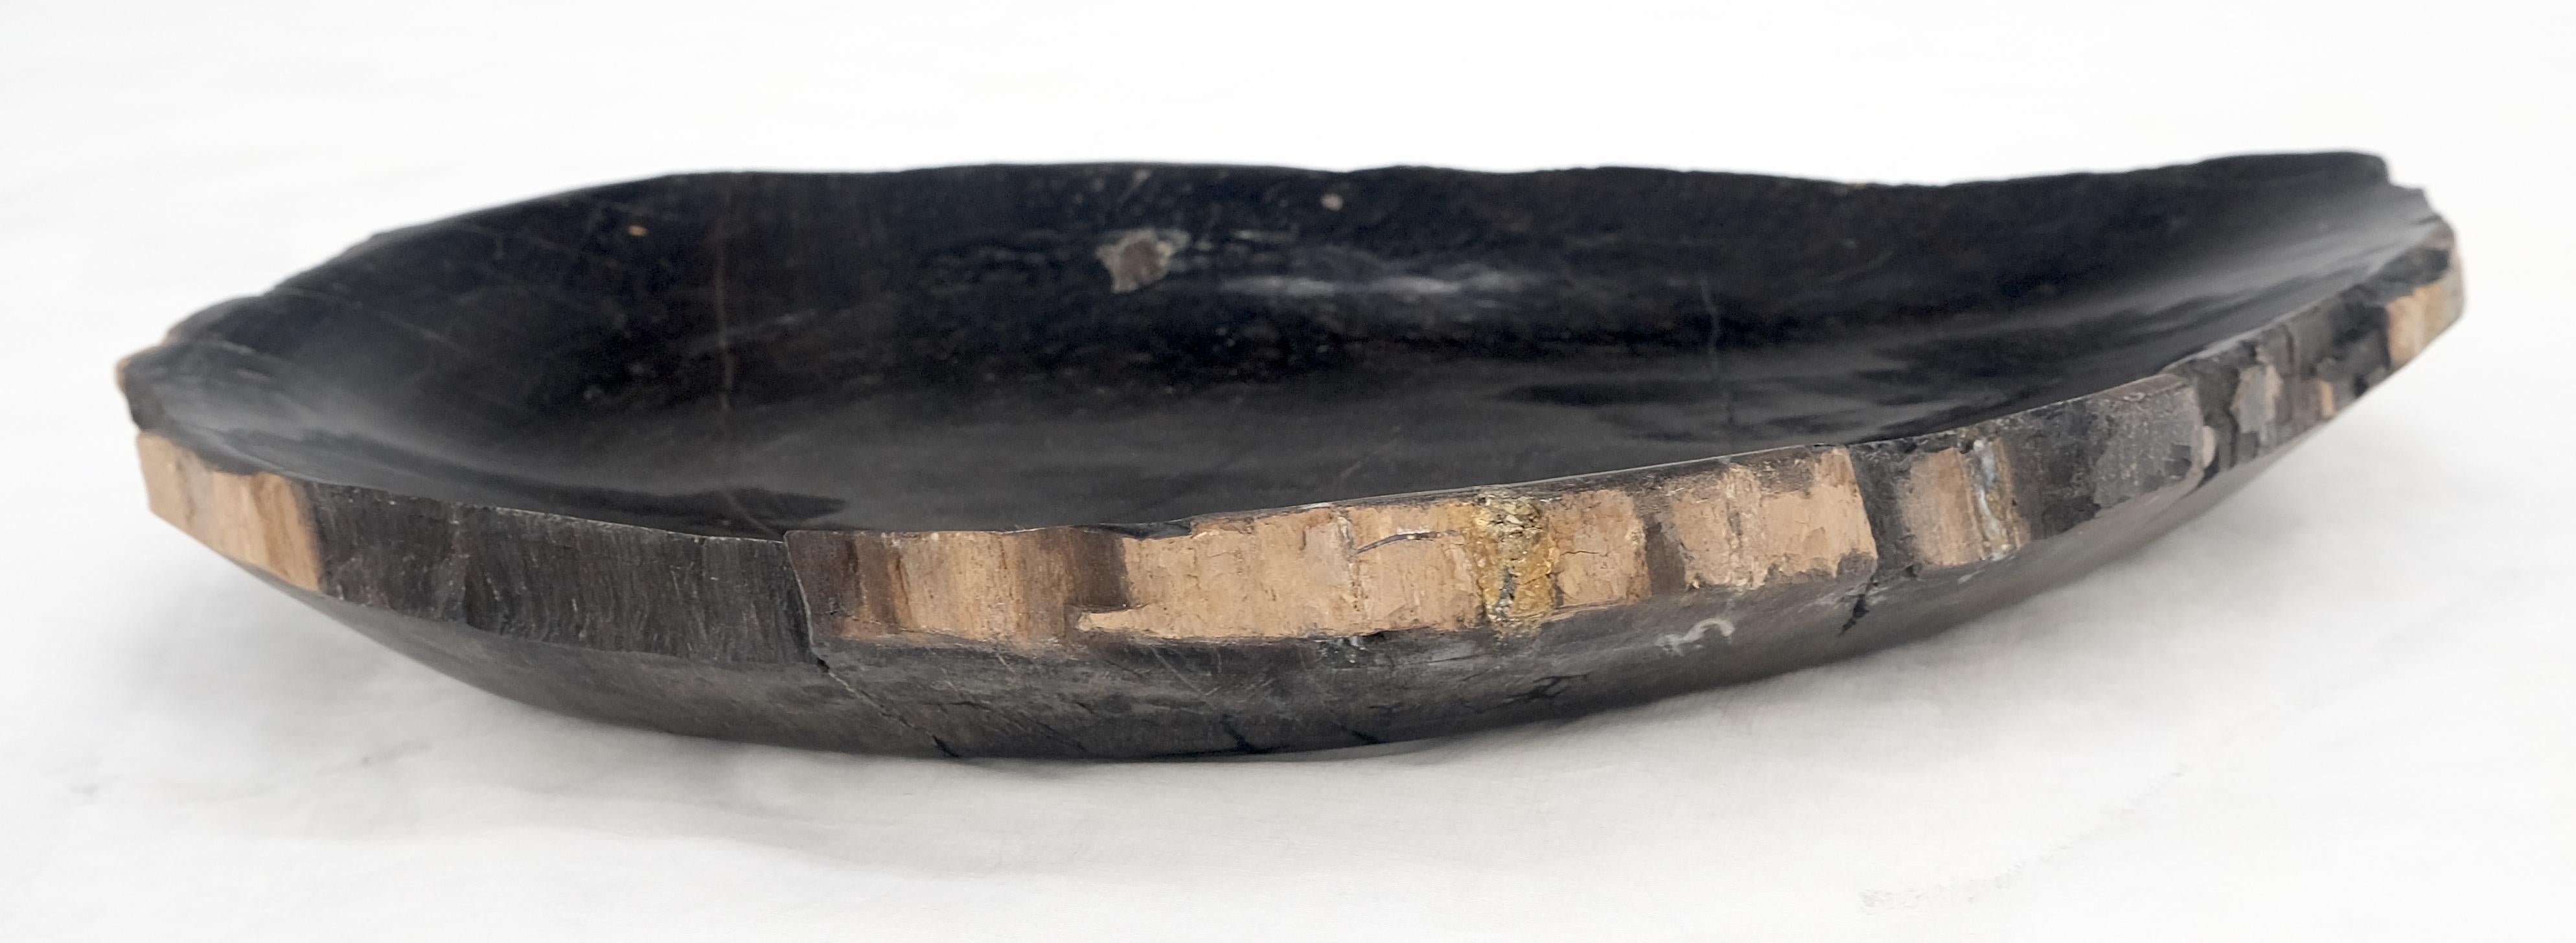 Petrified Wood Round Shape Solid Black Round Bowl Dish Large Plate Ashtray MINT! In Excellent Condition For Sale In Rockaway, NJ